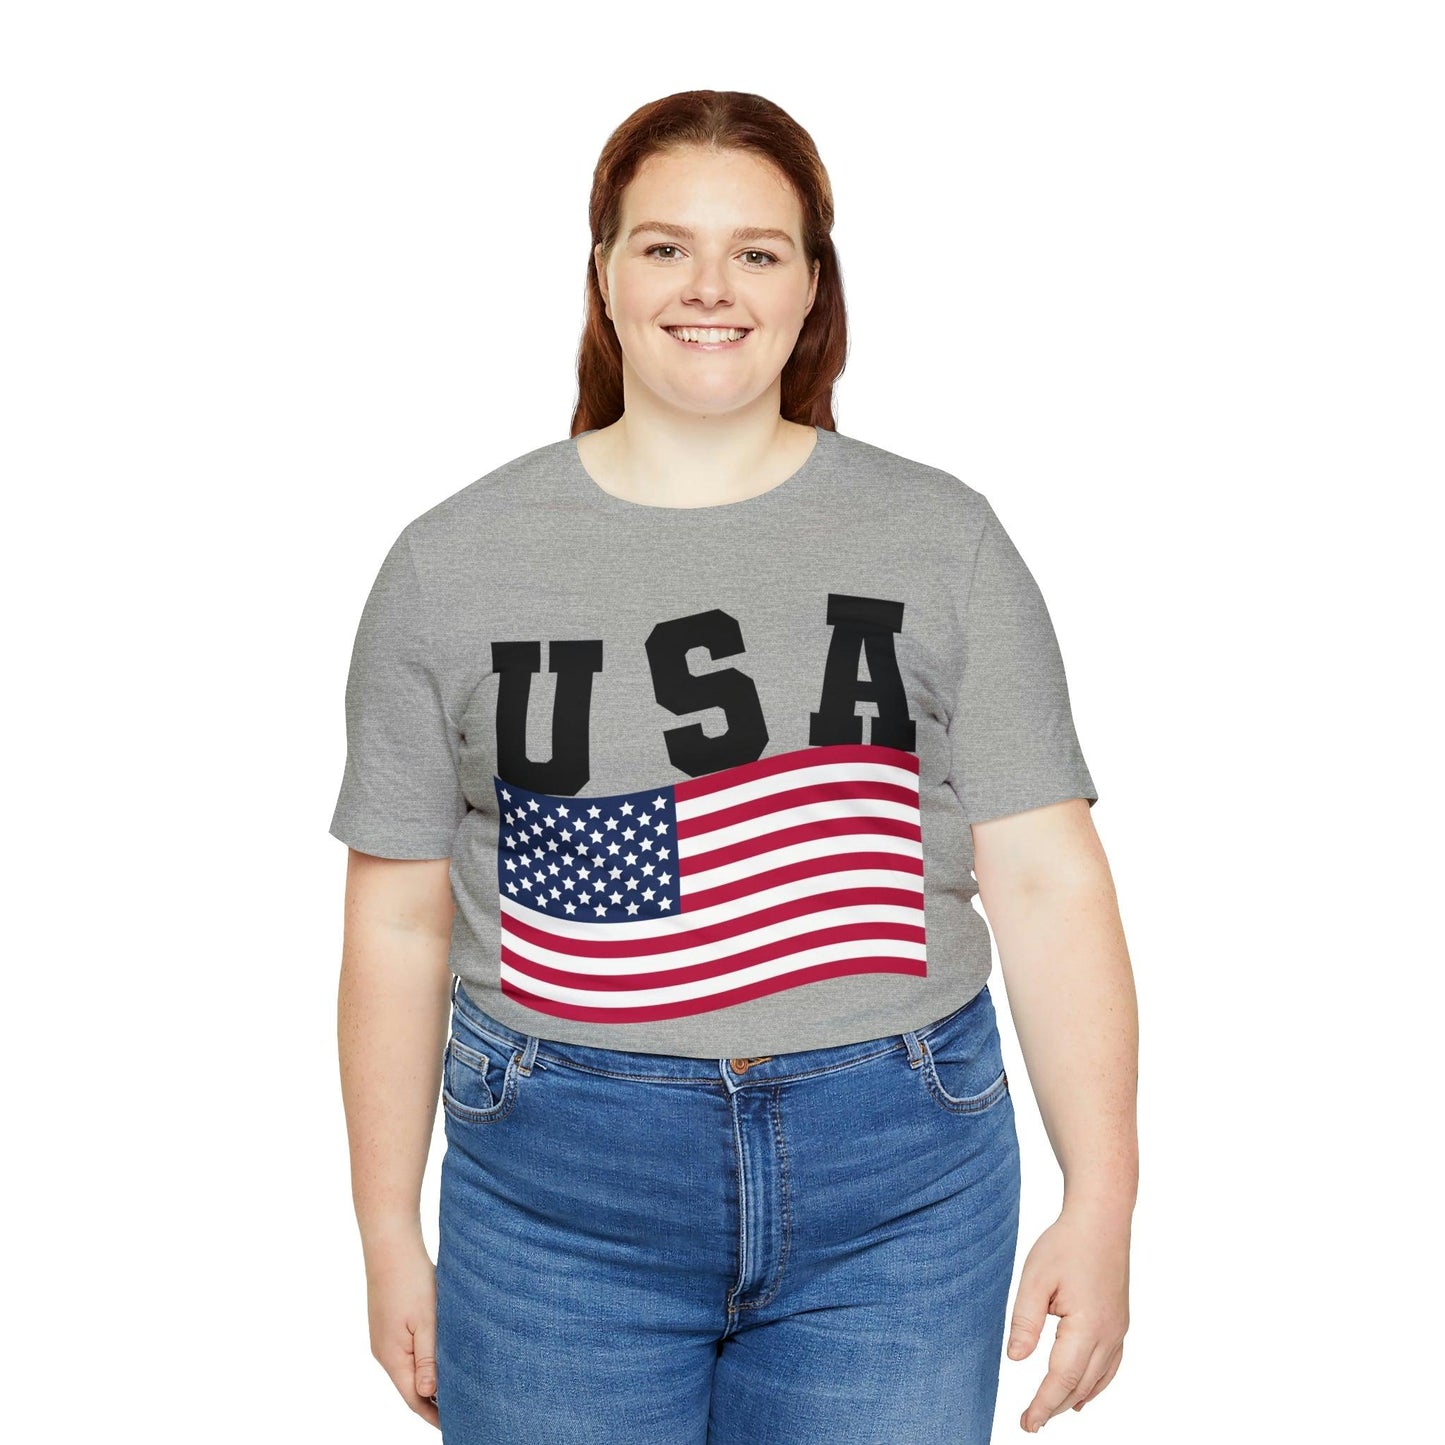 American flag shirt, Red, white, and blue shirt, 4th of July shirt - Giftsmojo